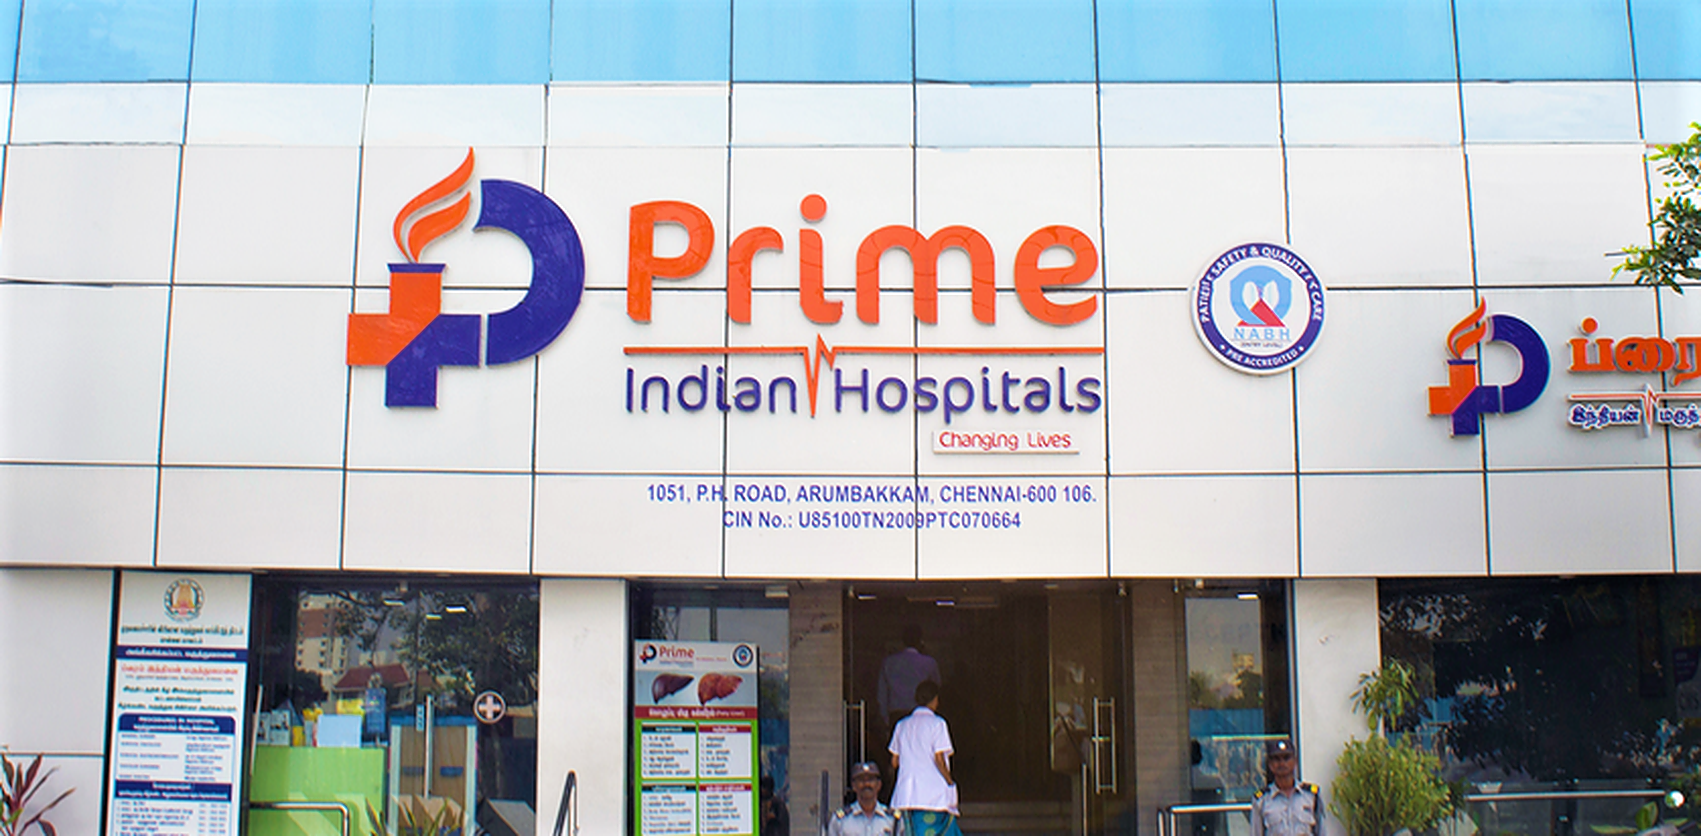 Prime Indian Hospitals photo